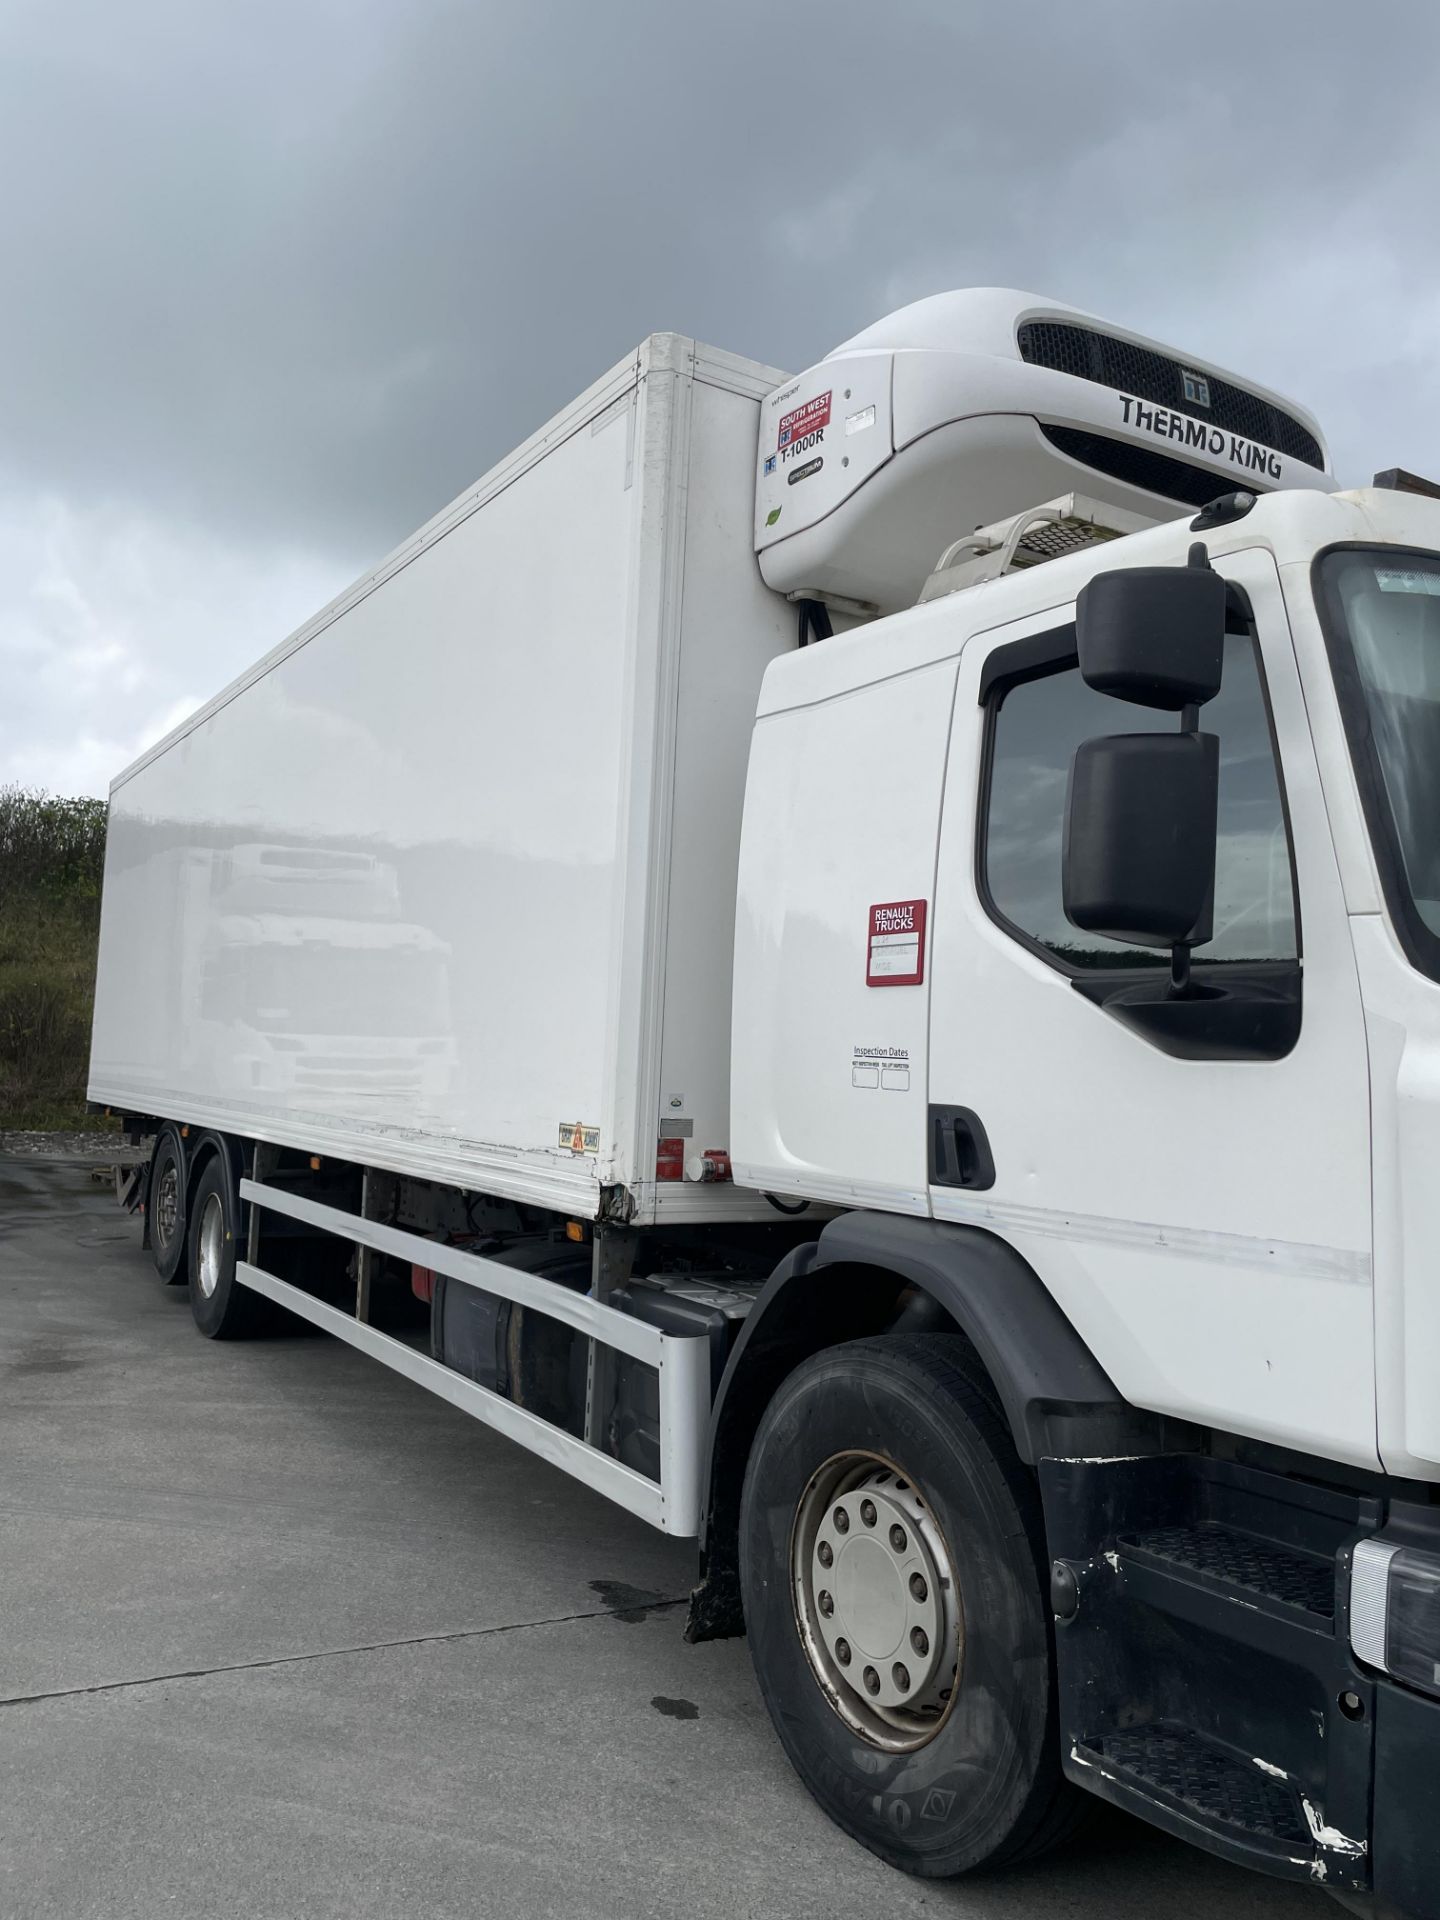 RENAULT REFRIGERATED TRUCK. 30 FT - REG 152 0Y 1062 - Image 3 of 5